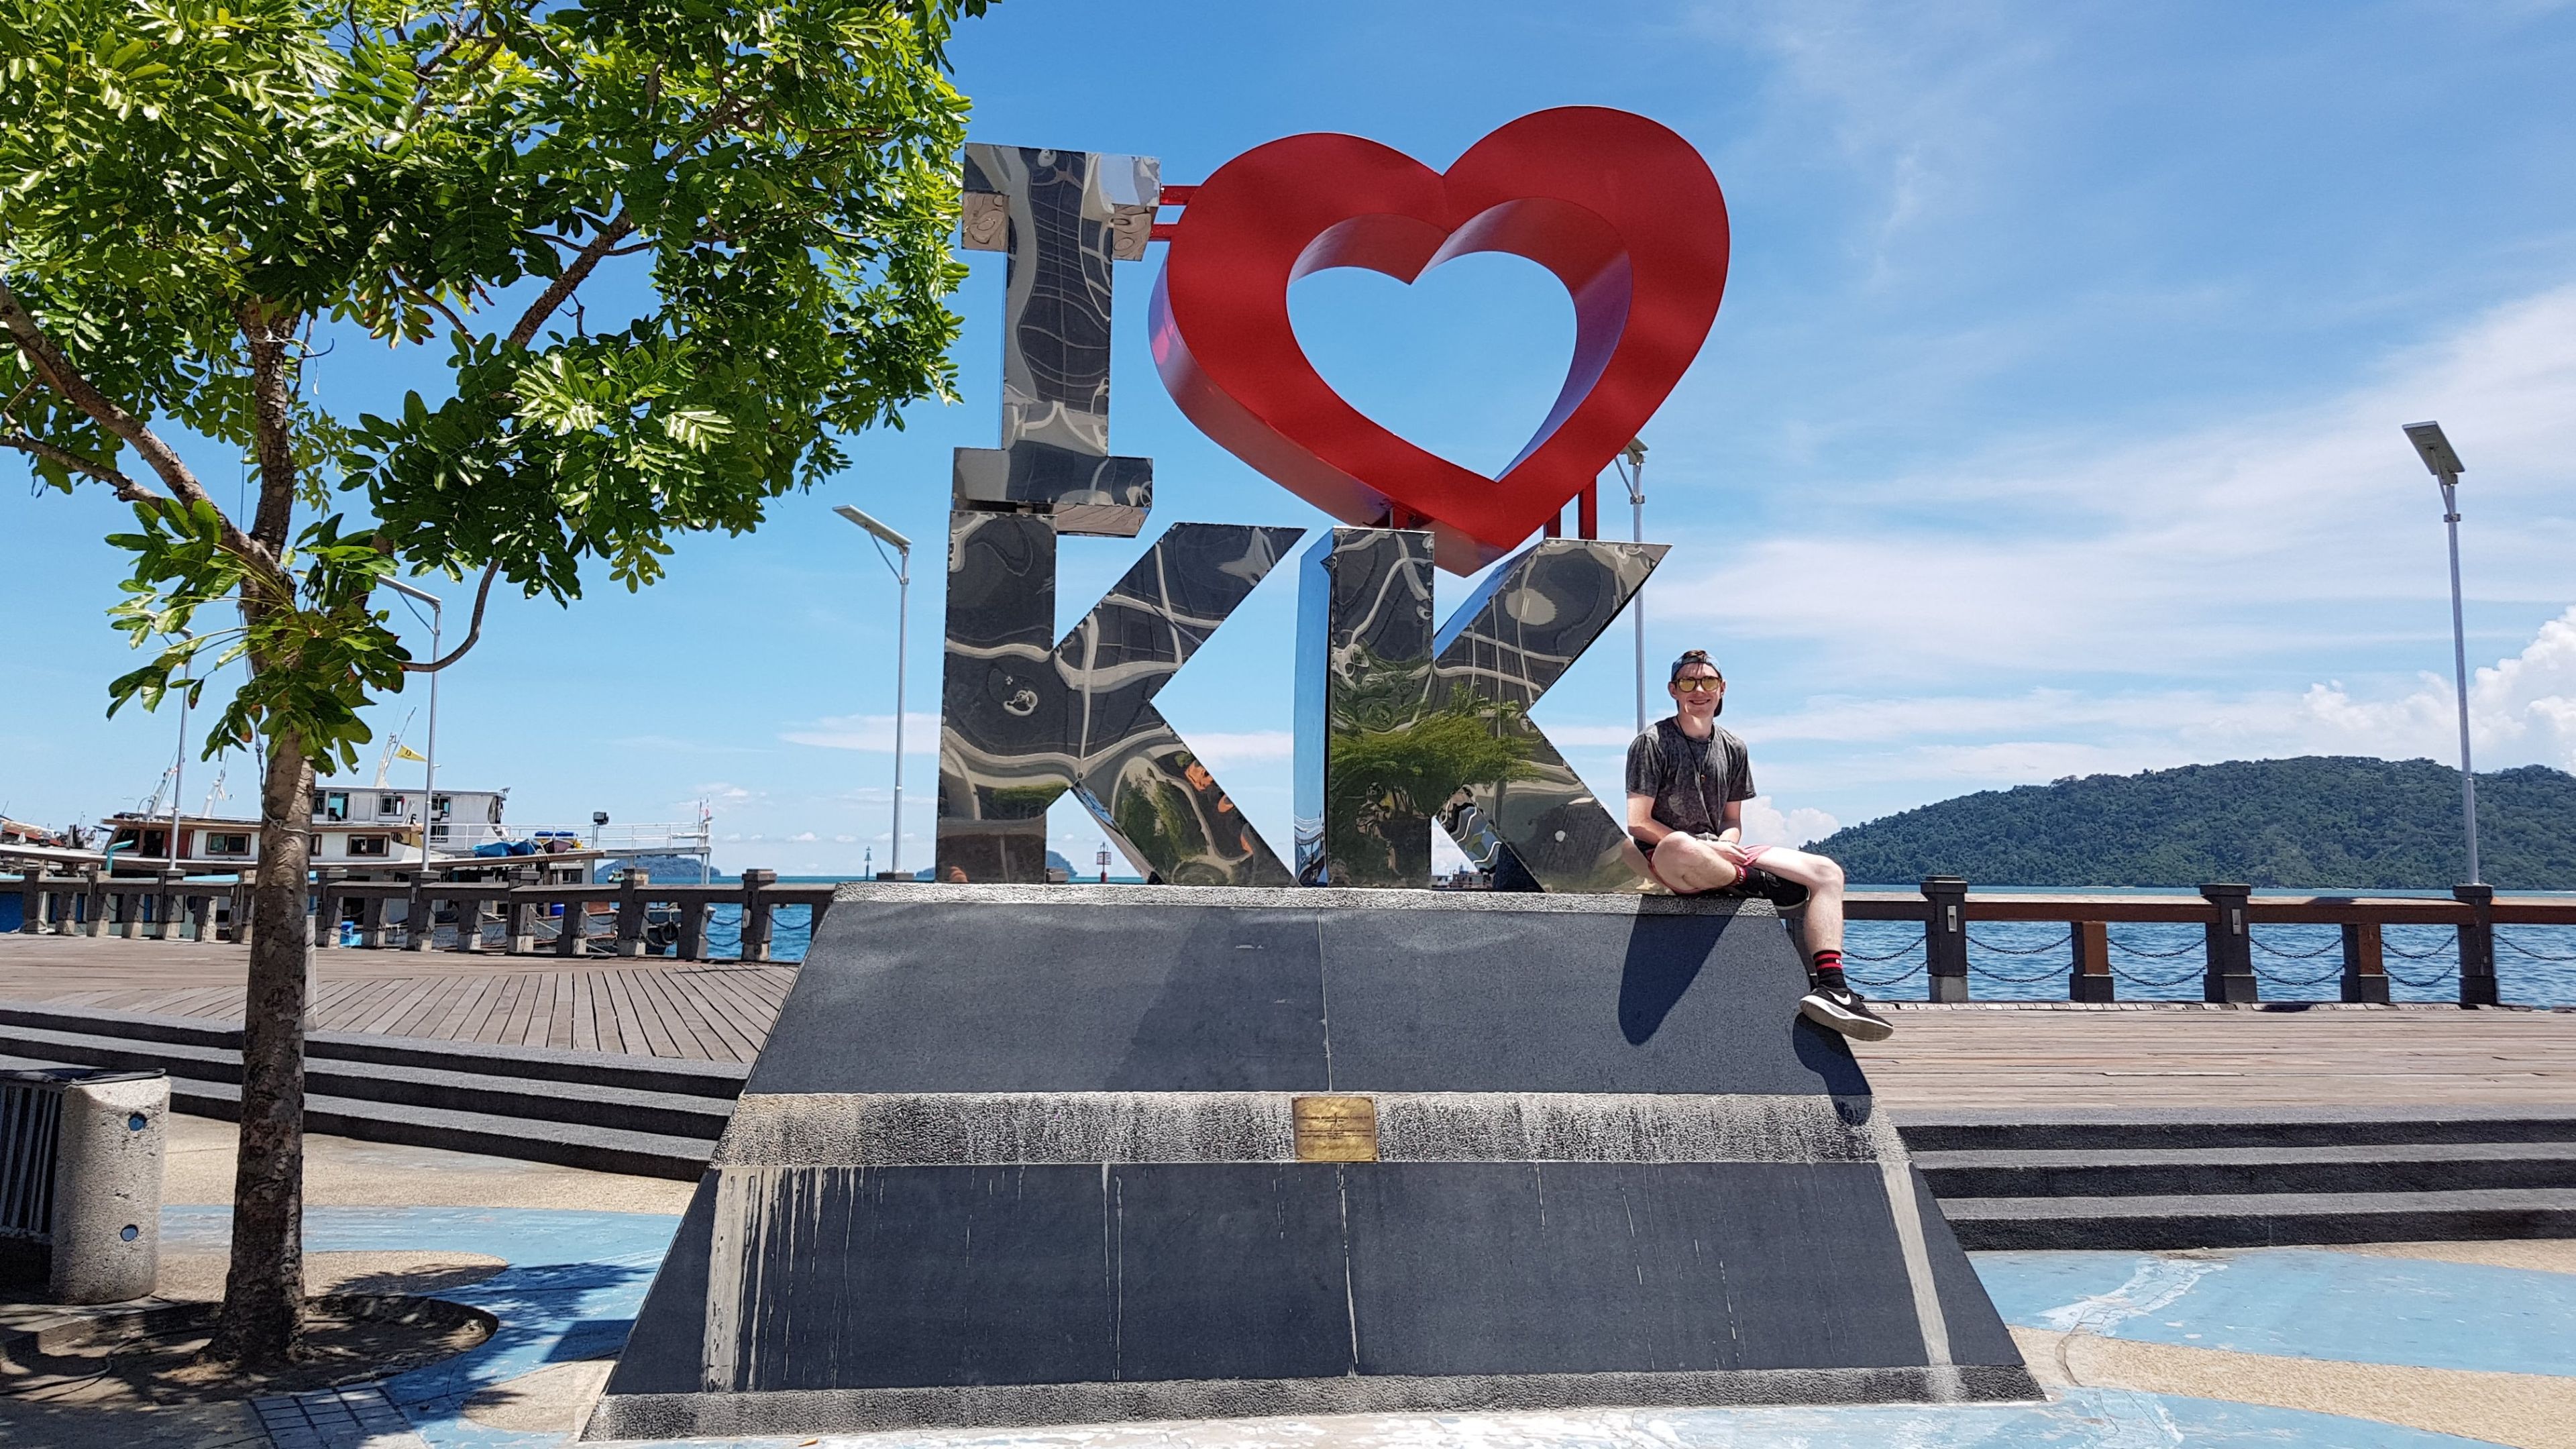 Josh is sitting on top of the I heart KK sculpture at the Kota Kinabalu waterfront in Sabah, Malaysia